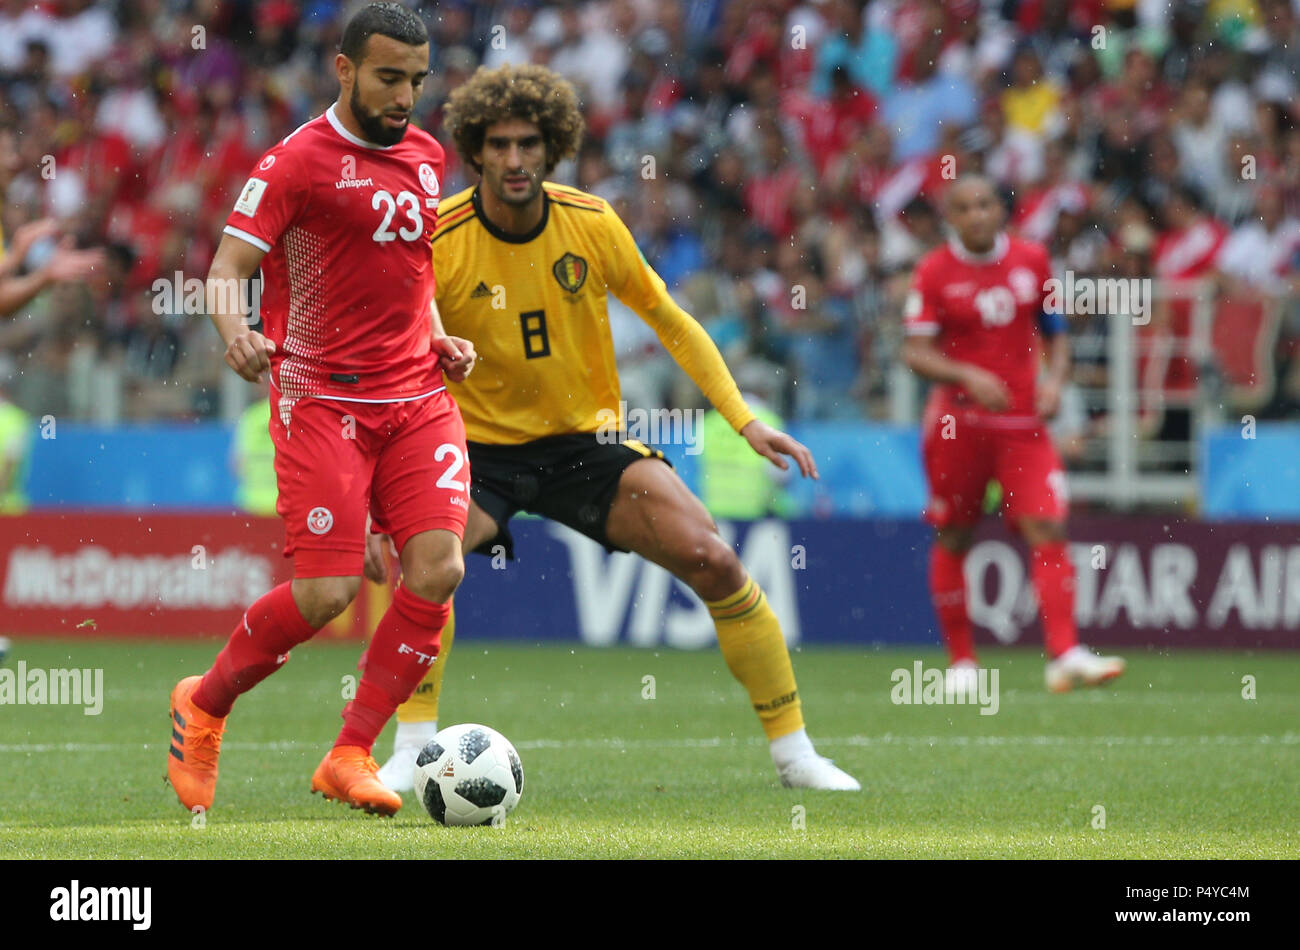 Moscow, Russian. 23rd June, 2018. 23.06.2018. Moscow, Russian: NAIM SLITI in action during the Fifa World Cup Russia 2018, Group C, football match between BELGIUM V TUNISIA in SPARTAK STADIUM in Moscow Stadium Credit: Independent Photo Agency/Alamy Live News Stock Photo